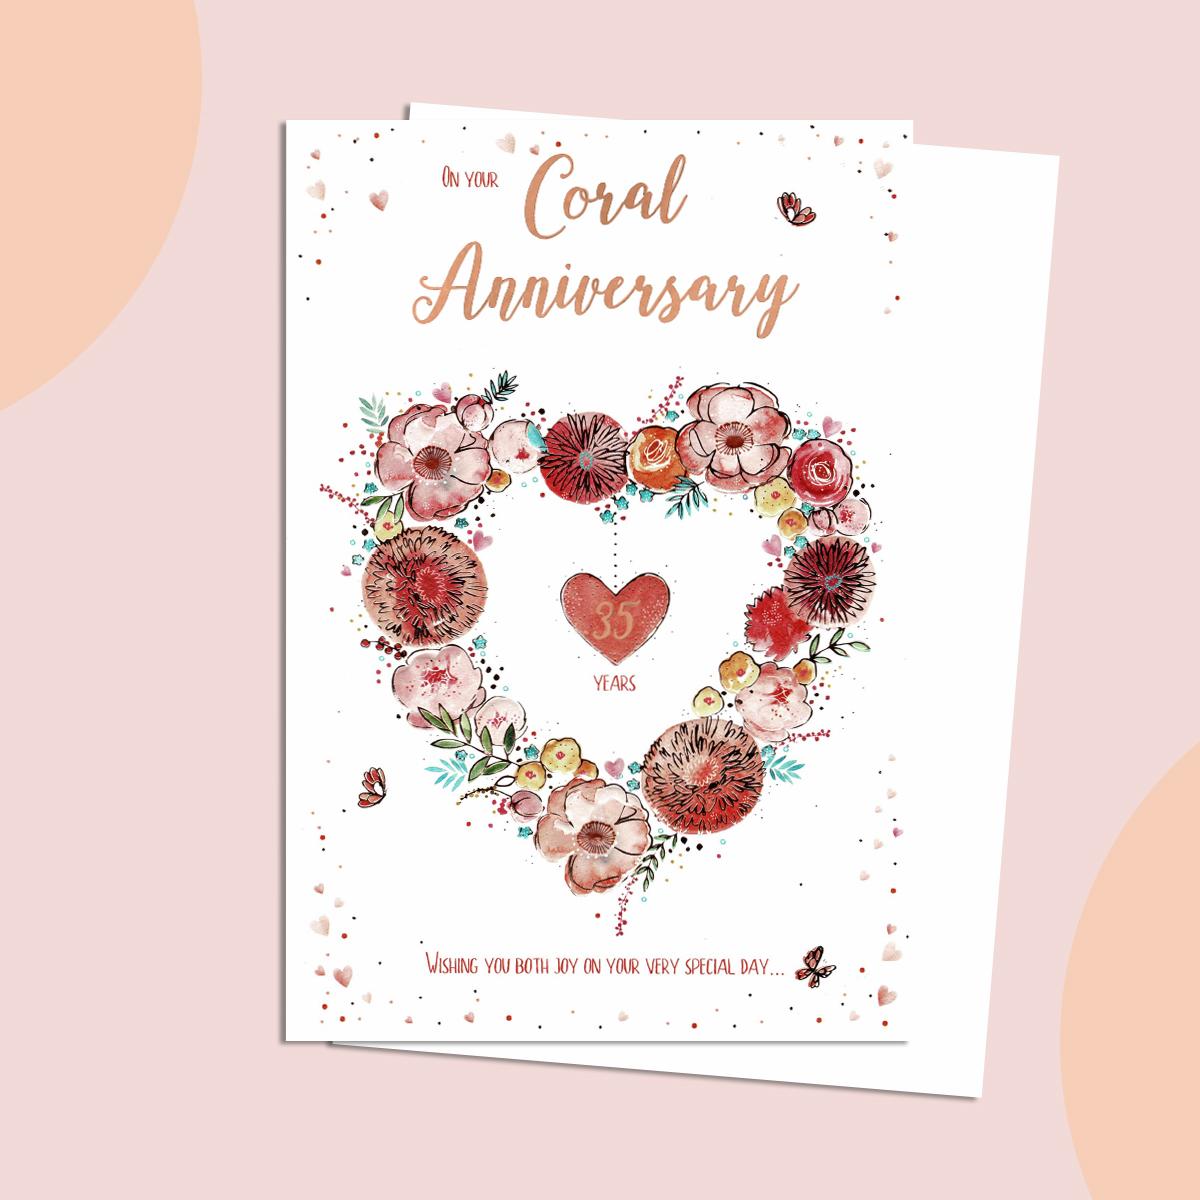 Coral Wedding Anniversary Card Featuring A Heart Made Out Of Coral Coloured Flowers